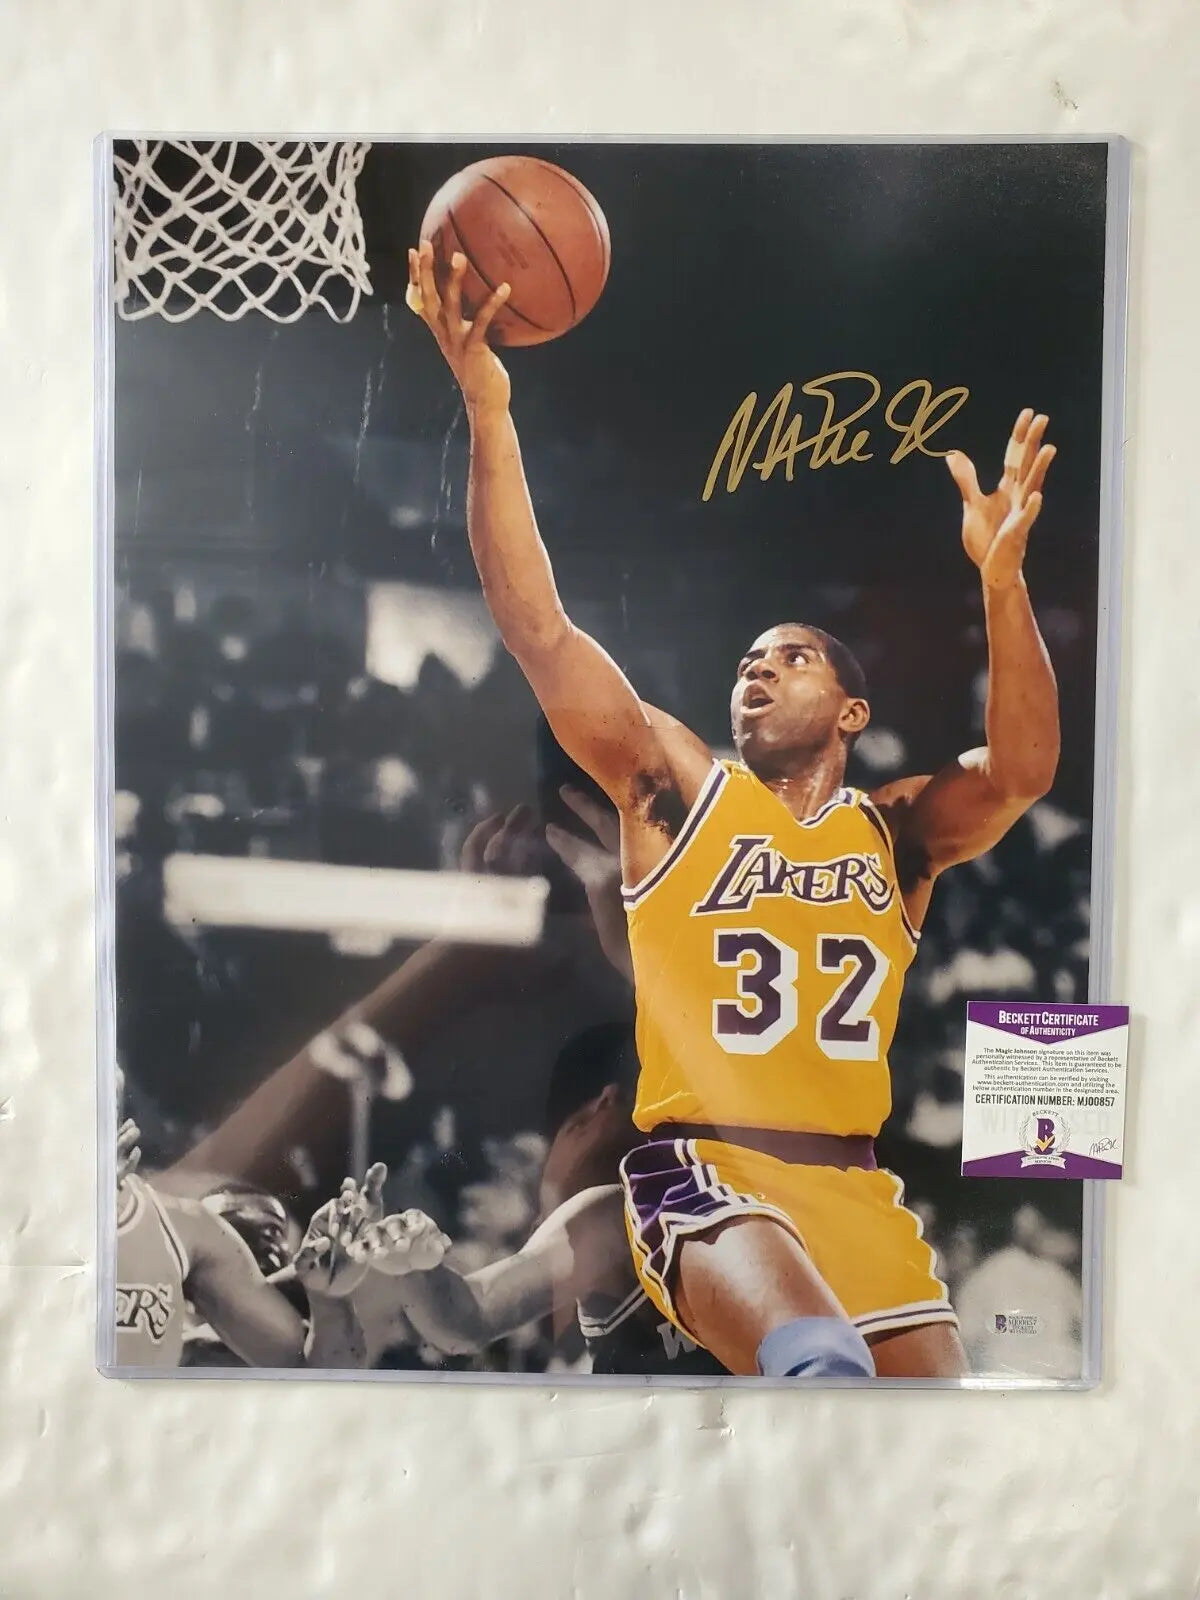 MVP Authentics Magic Johnson Autographed Signed L.A. Lakers 16X20 Photo Beckett Coa 107.10 sports jersey framing , jersey framing